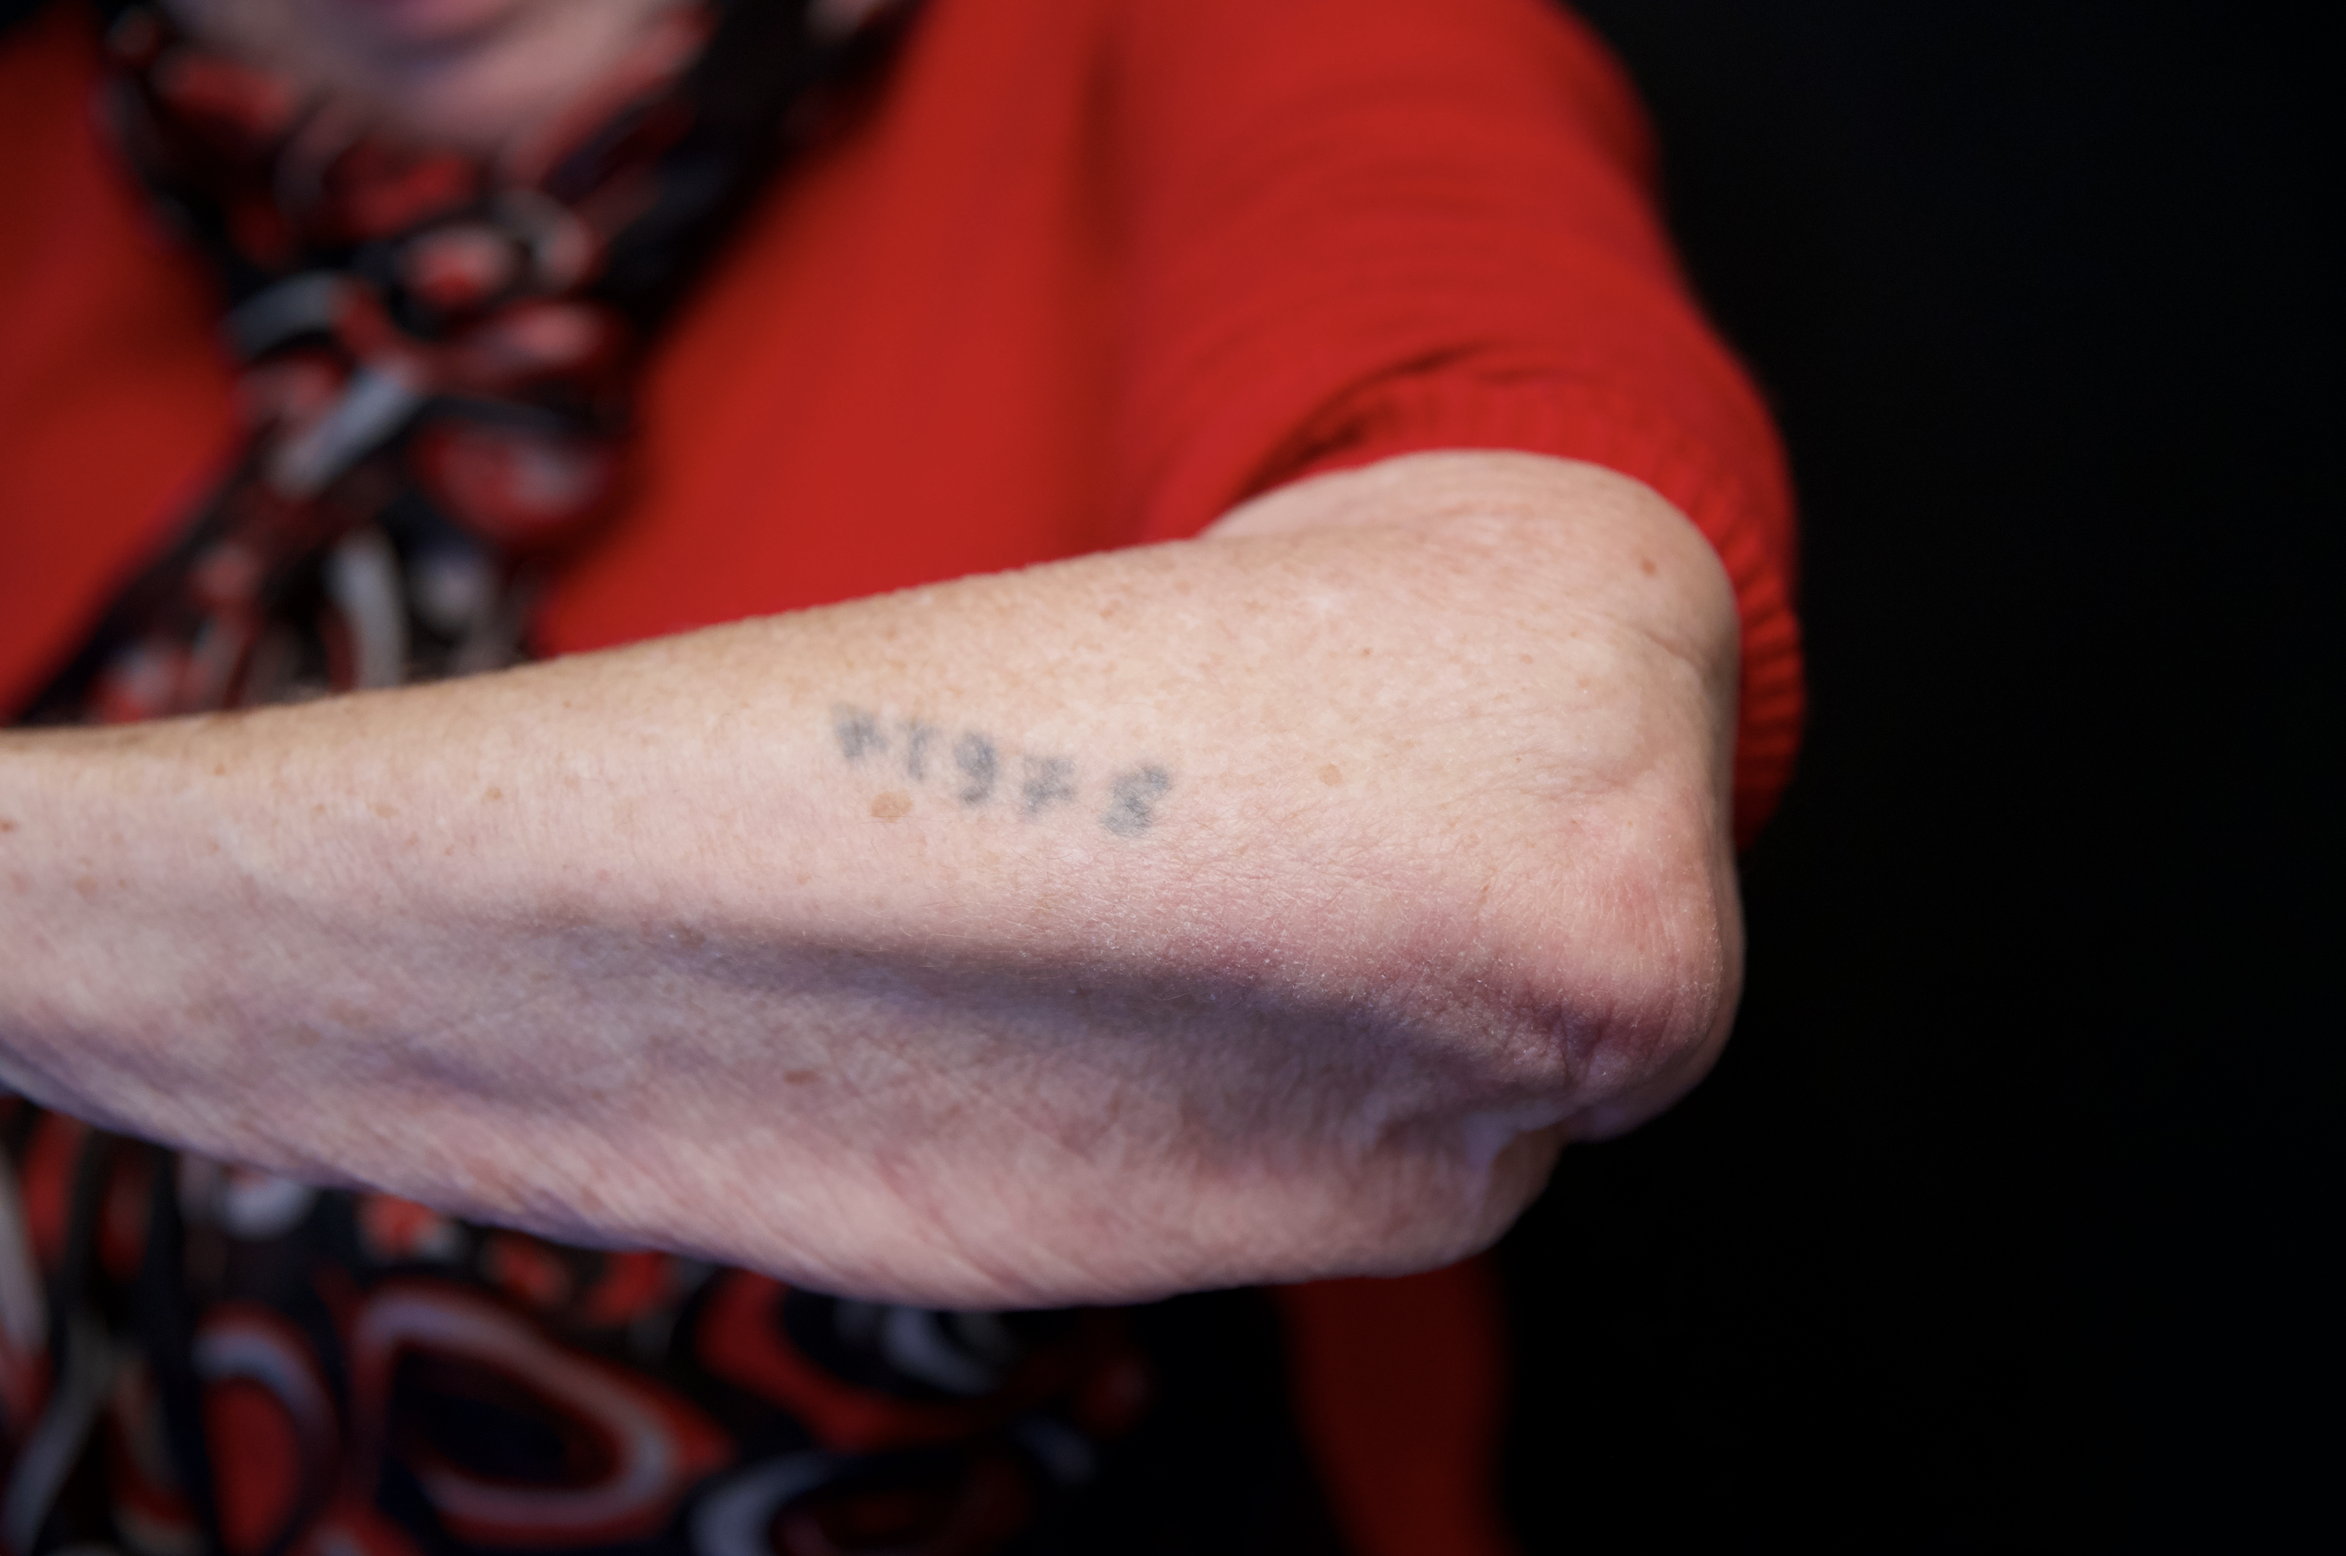 Concentration camp tattoo on the arm of Nina Weil